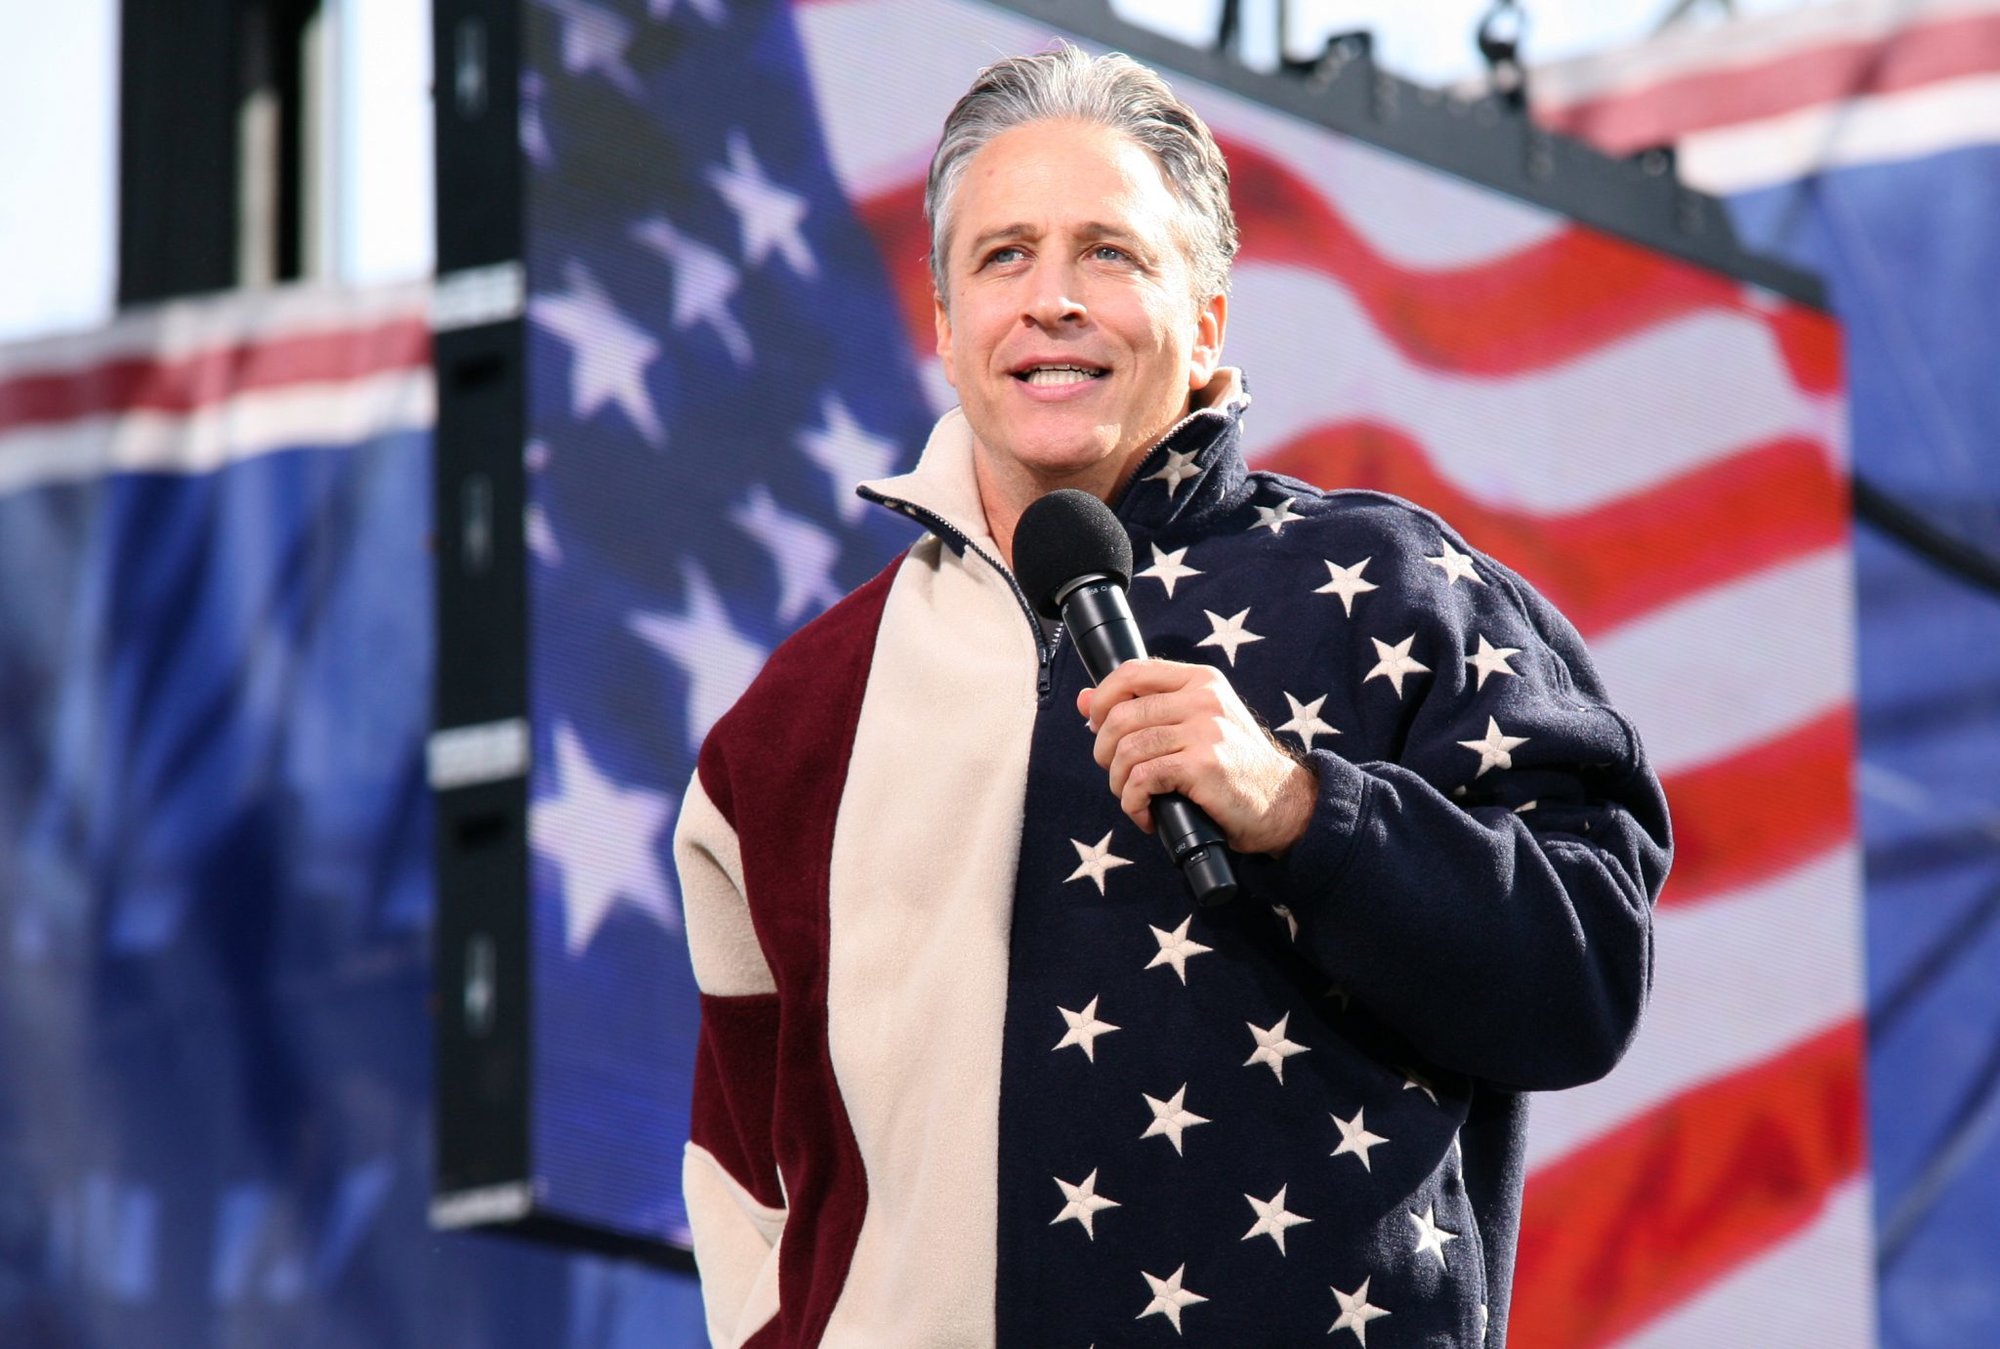 Jon Stewart at the Rally to Restore Sanity and/or Fear in 2010. Wikimedia Commons photo.